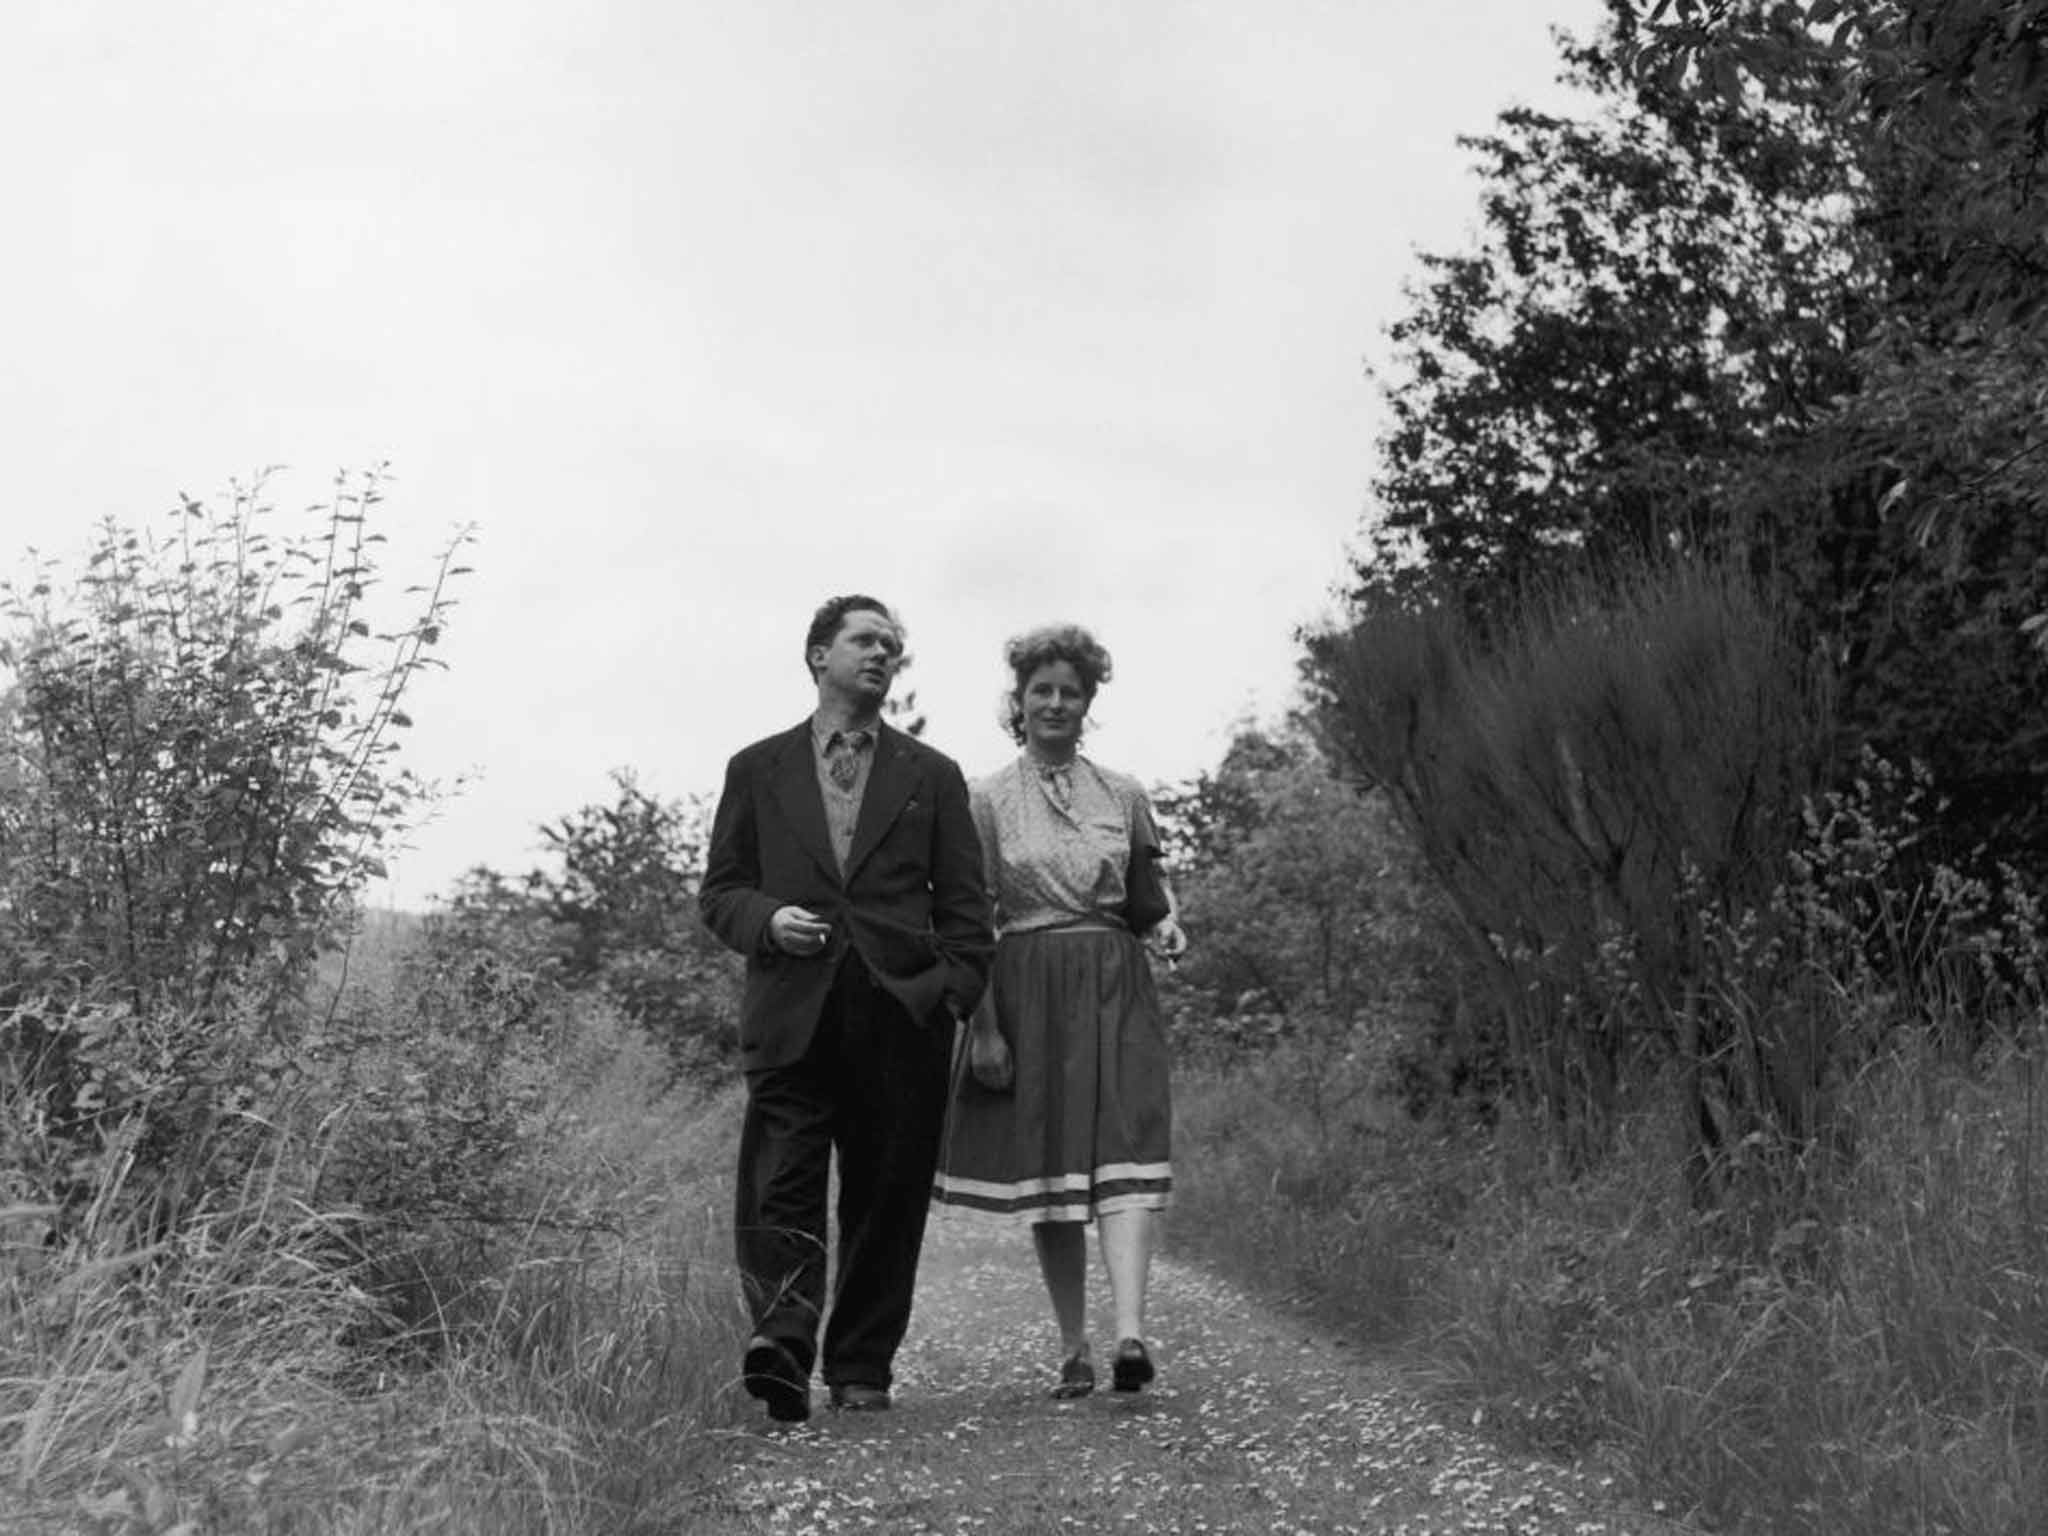 Dylan Thomas in 1946 with his wife Caitlin Macnamara, who he wooed away from the writer Augustus John